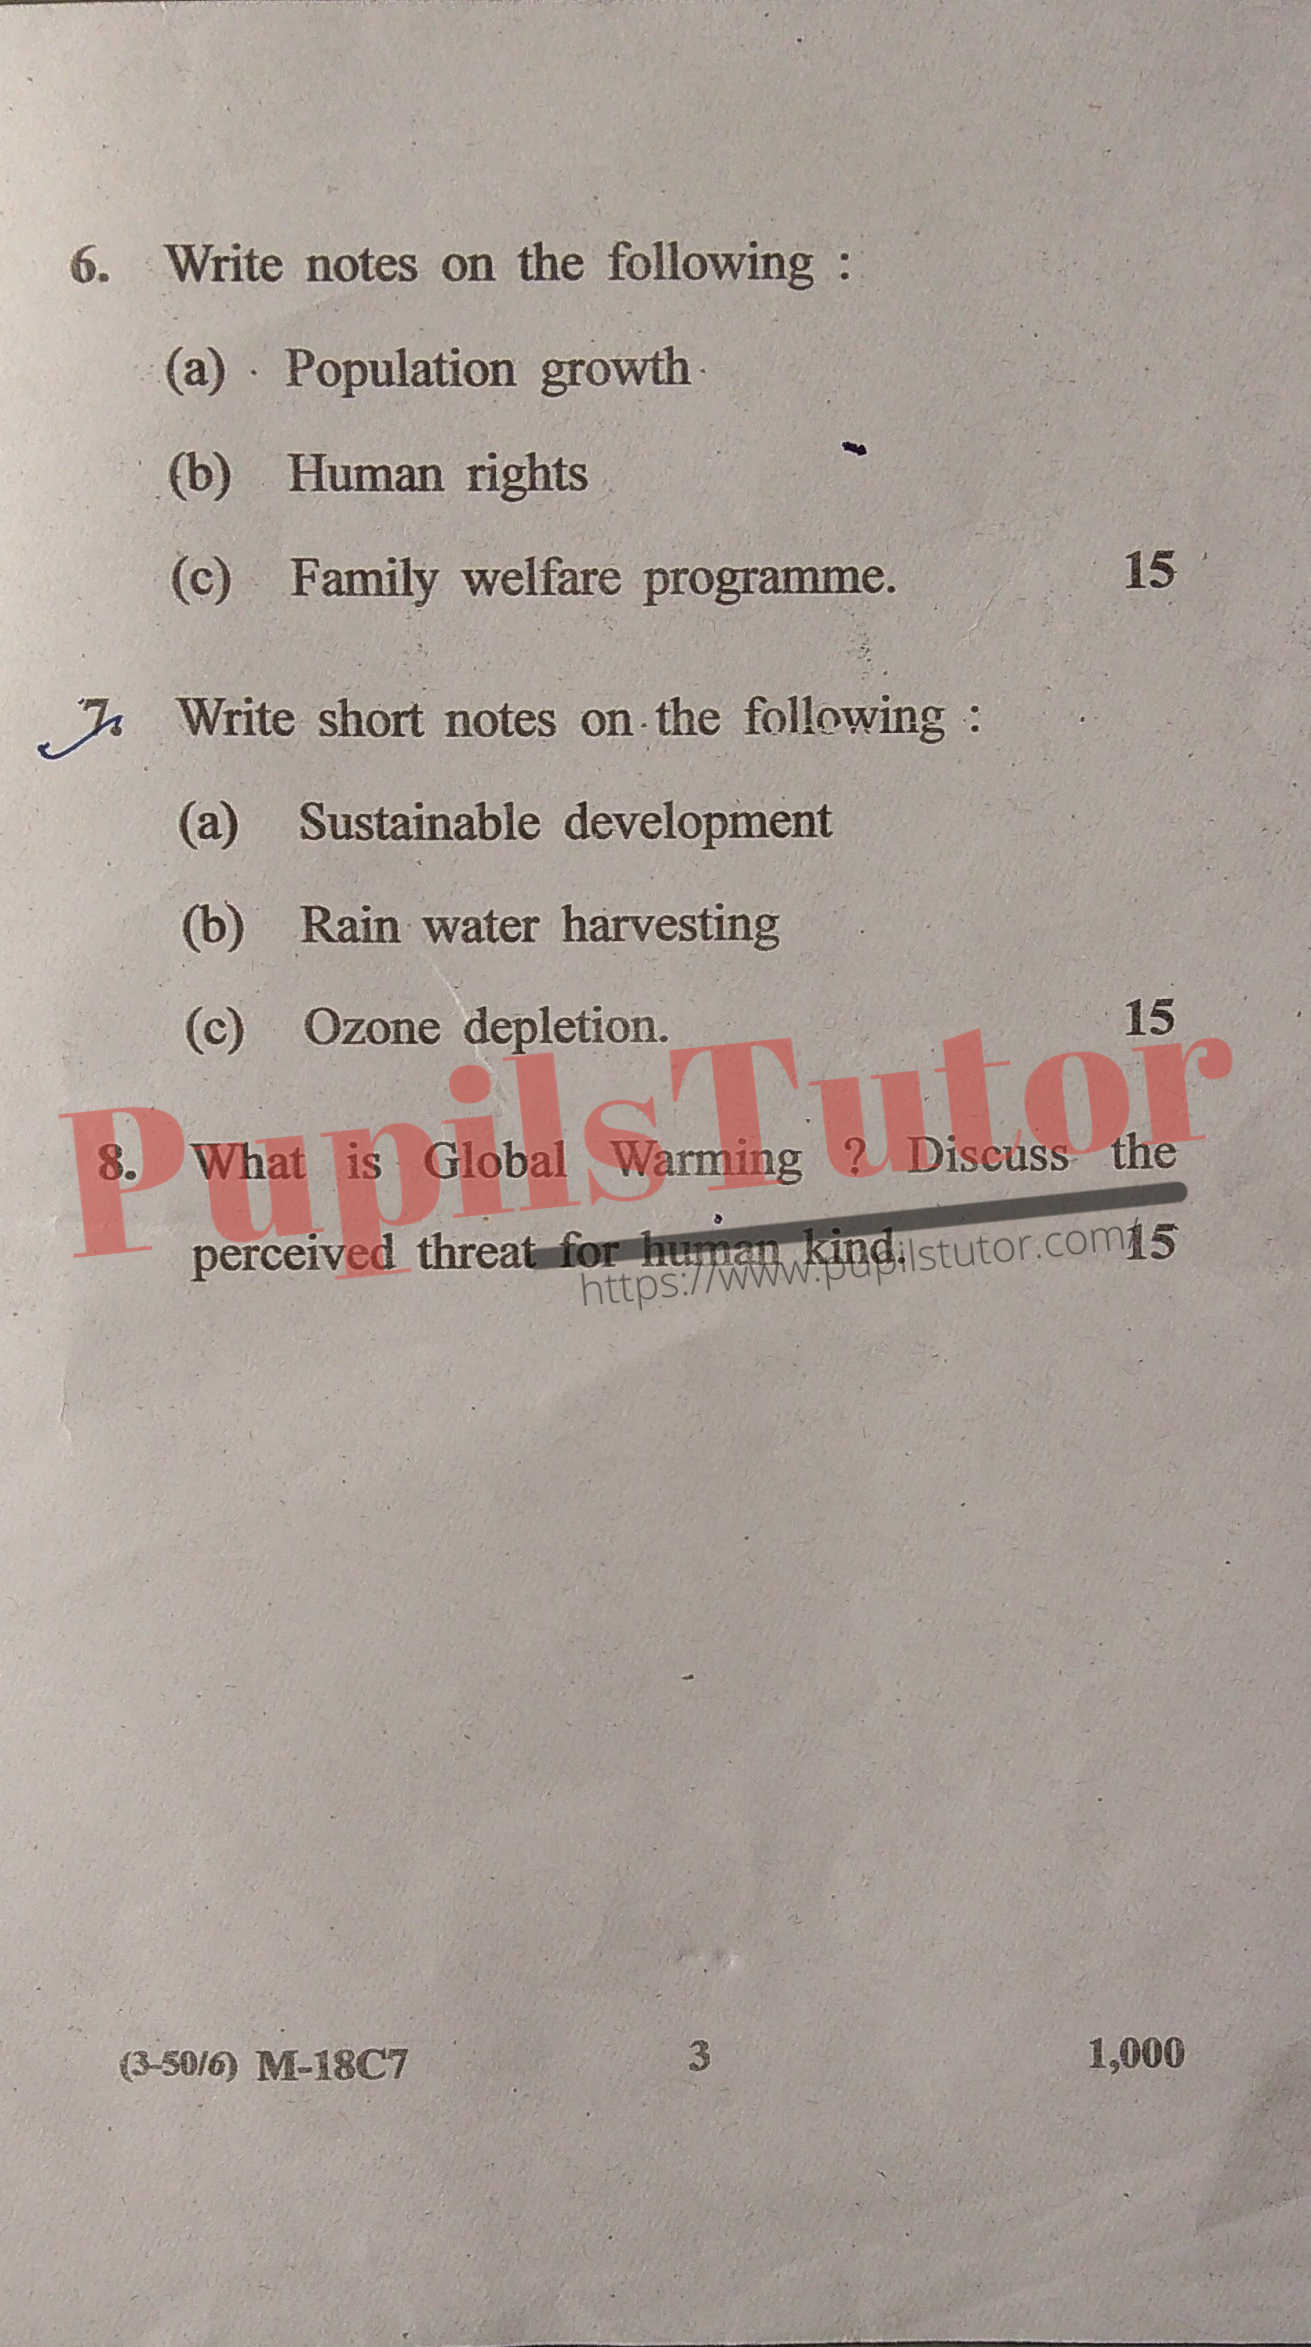 Free Download PDF Of M.D. University B.Tech Third Semester Latest Question Paper For Environmental Science Subject (Page 3) - https://www.pupilstutor.com